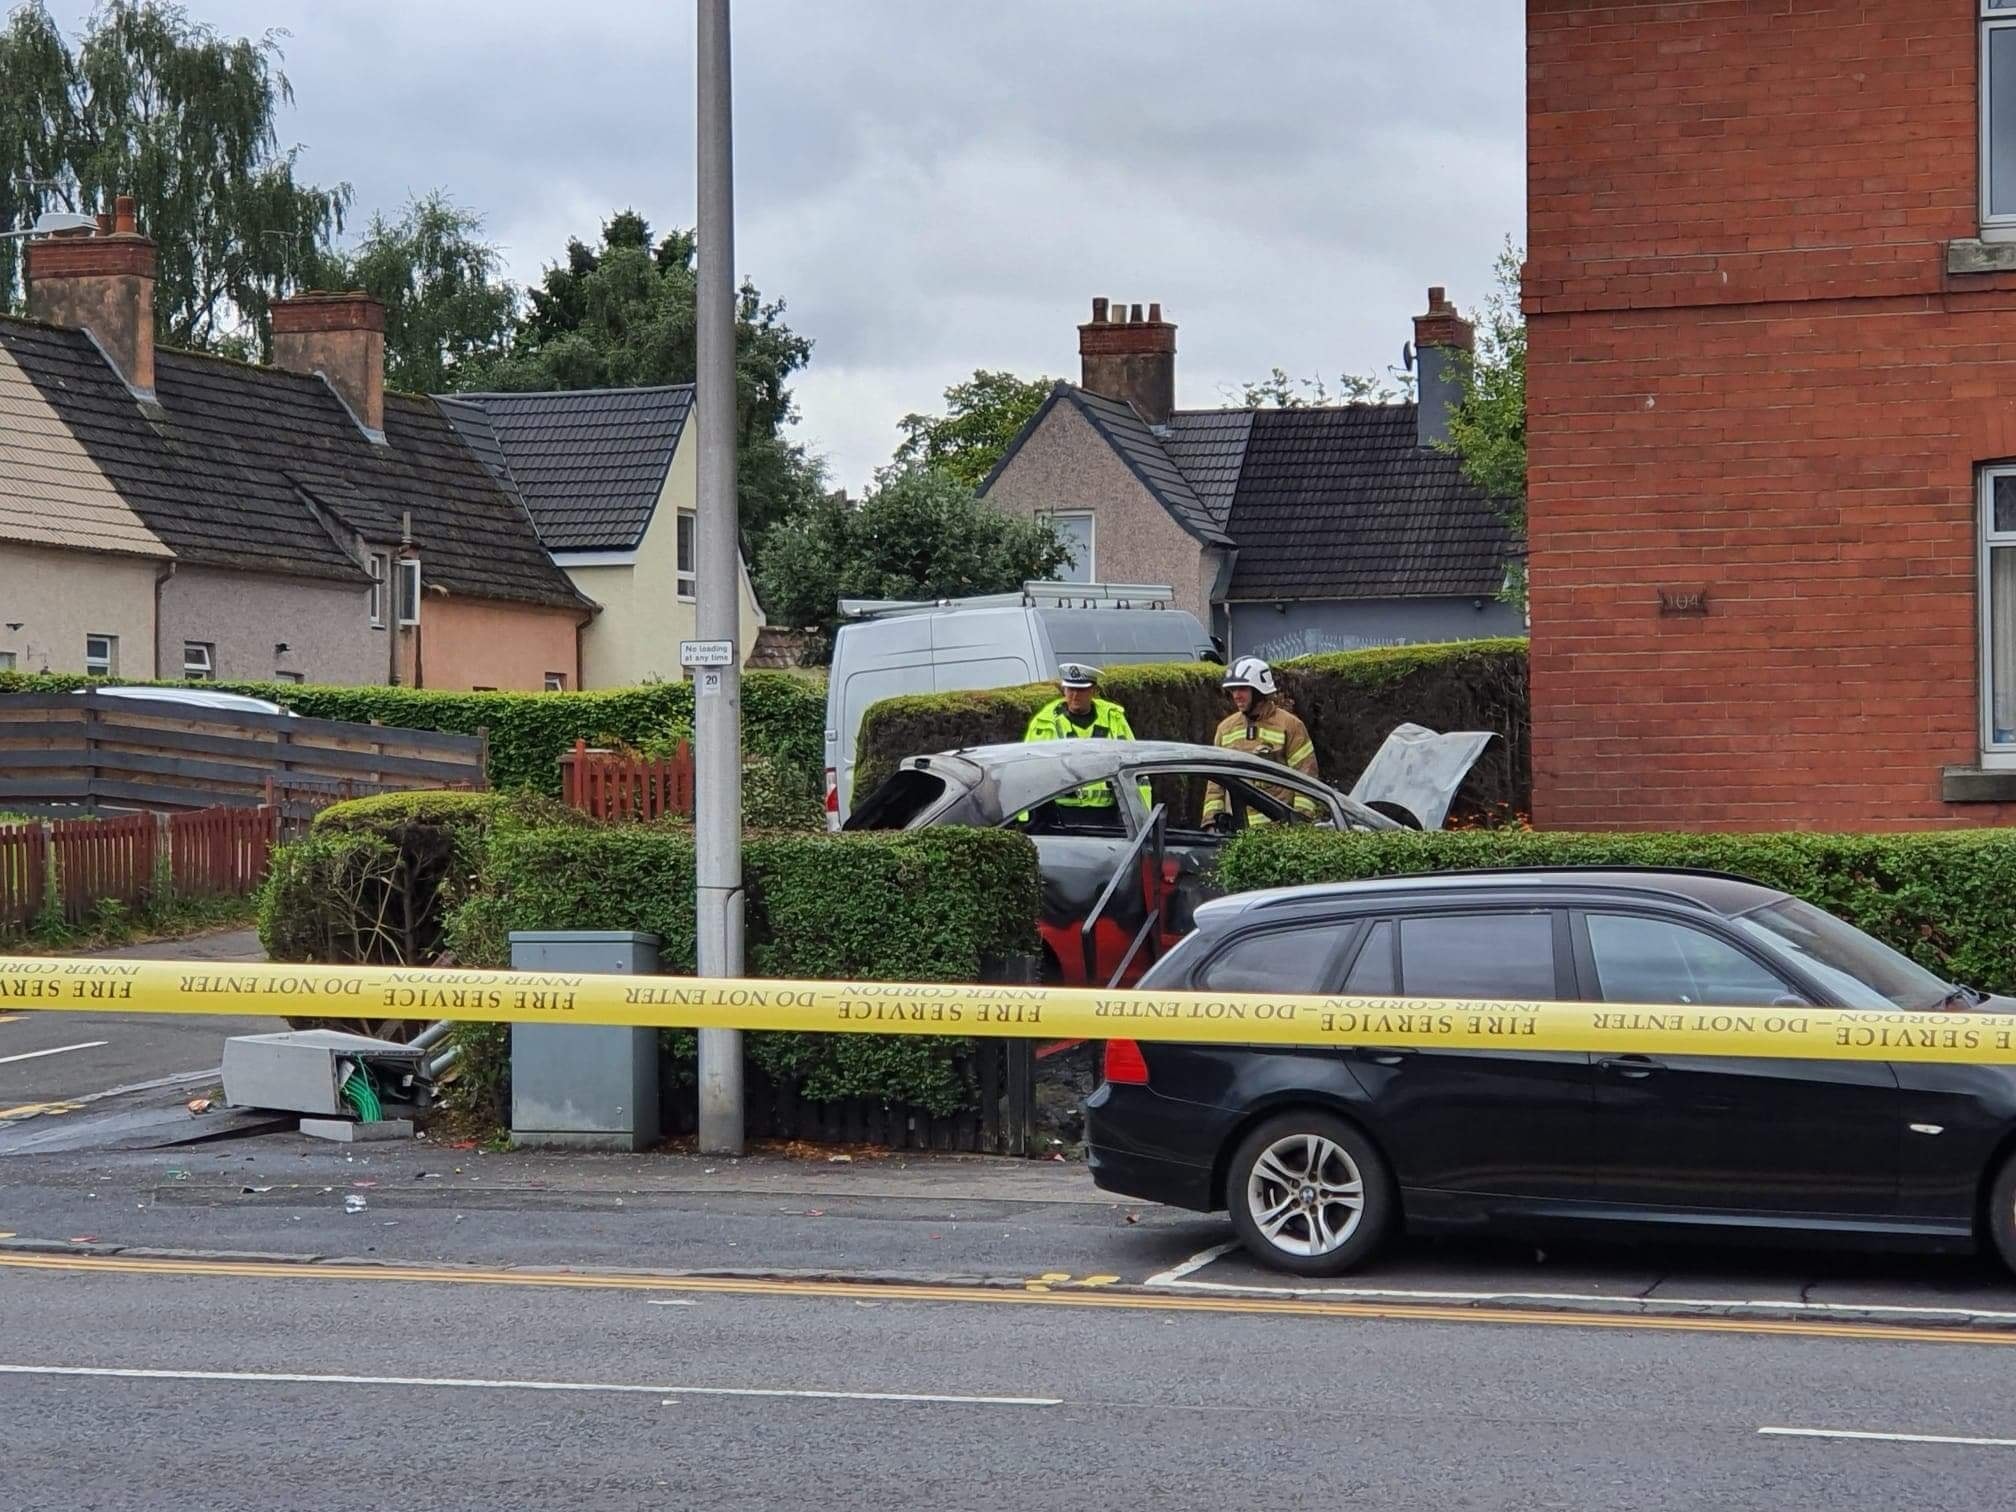 The car 'spun out, hit a van, an electrical box and hit a house' according to one local. 